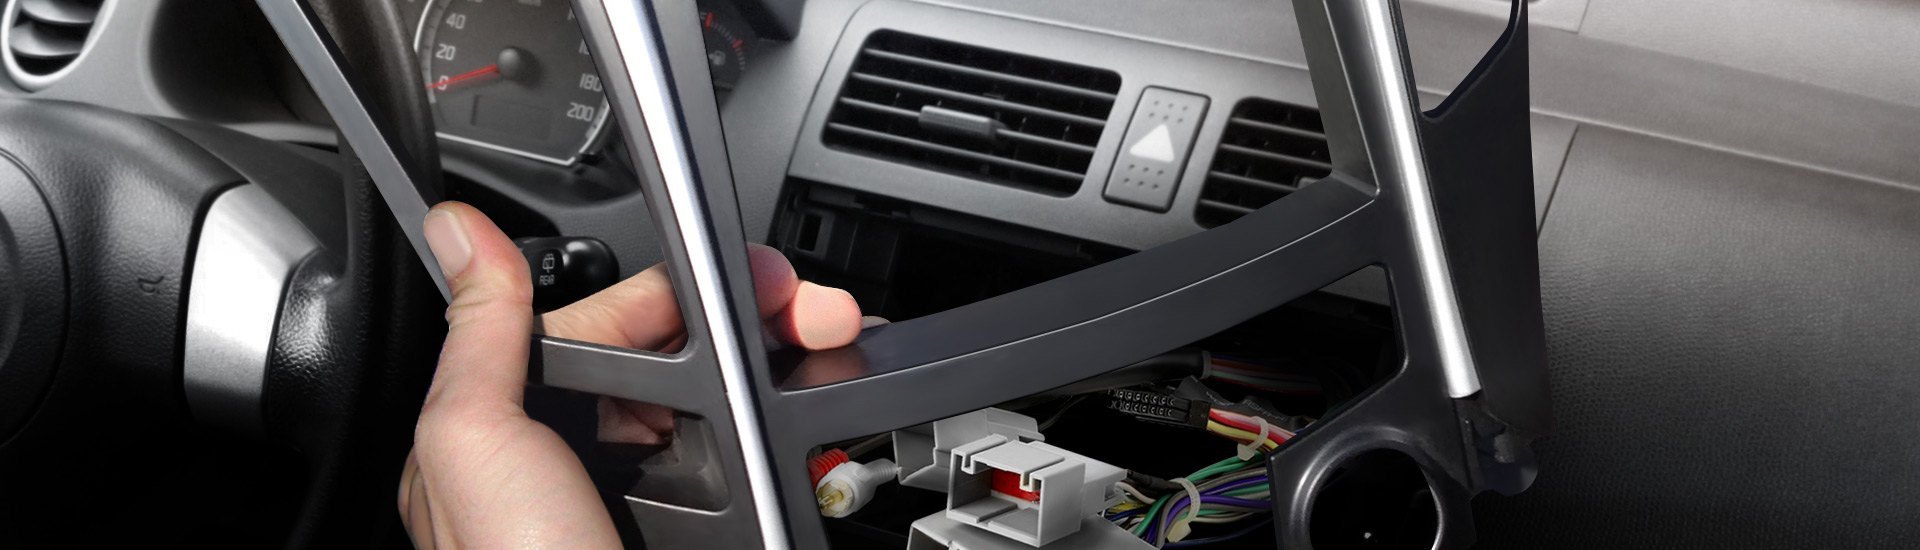 Five Types Of Installation Hardware You May Need When Buying A New Car Stereo